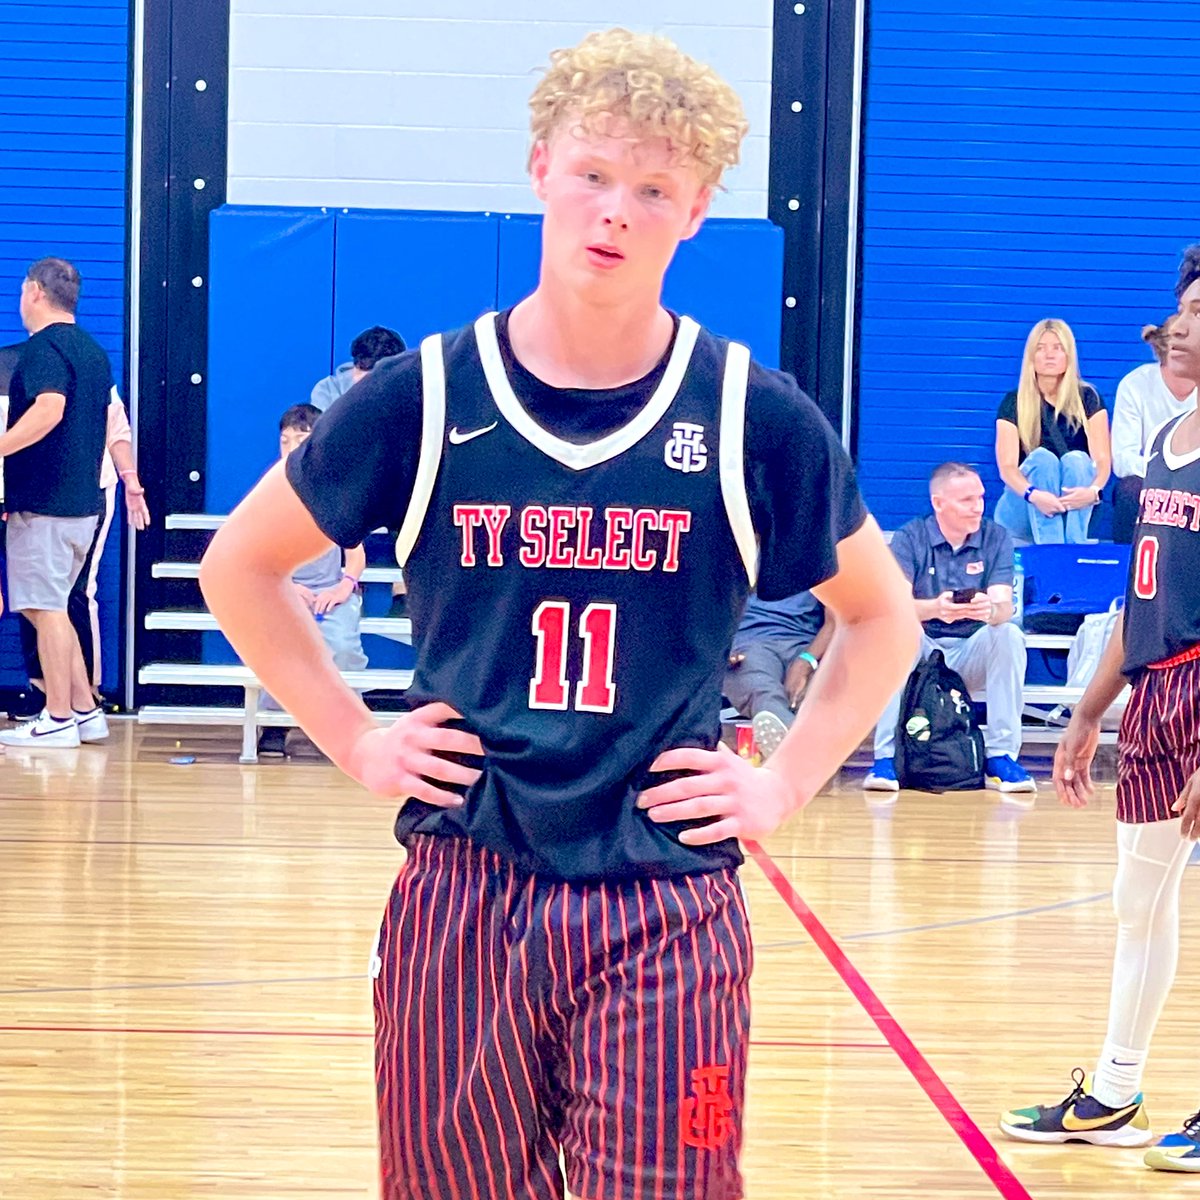 Evan Kemper is making his presence felt in this 10th Gr. Title Game for @TYSELECTHOOPS. 13 PTS & 2 treys as they have a 52-29 lead over “Miami City”. #FLCup